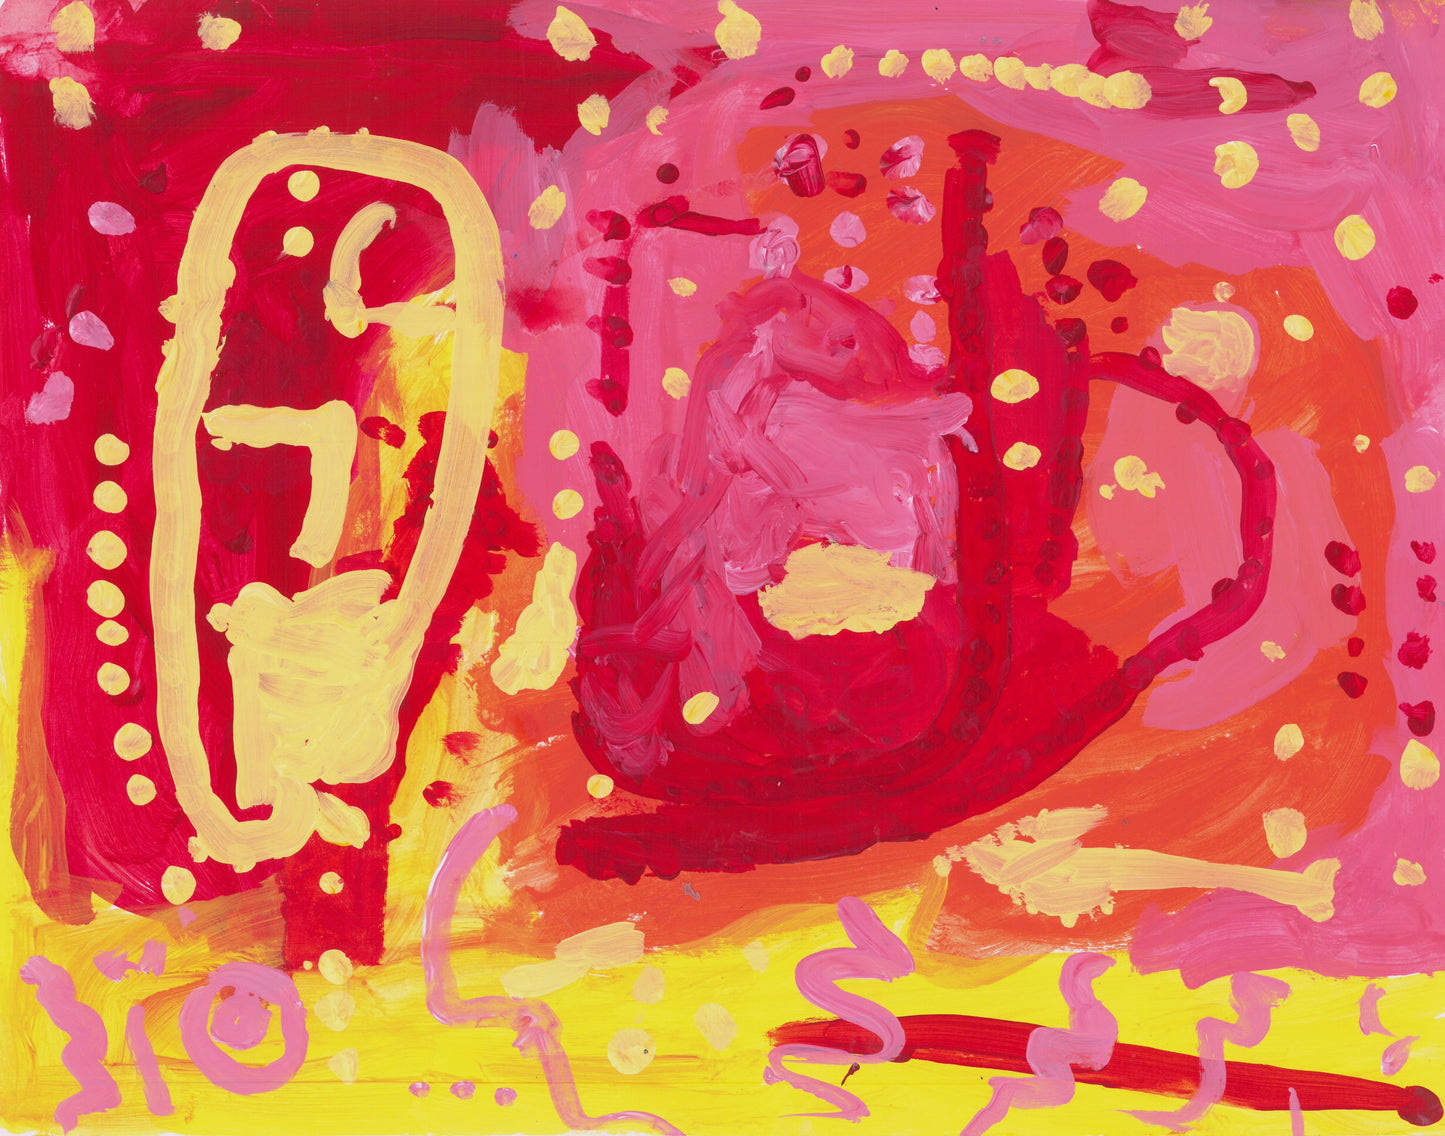 This is an abstract painting of a yellow face, with red, orange, pink and yellow quiggles and dots